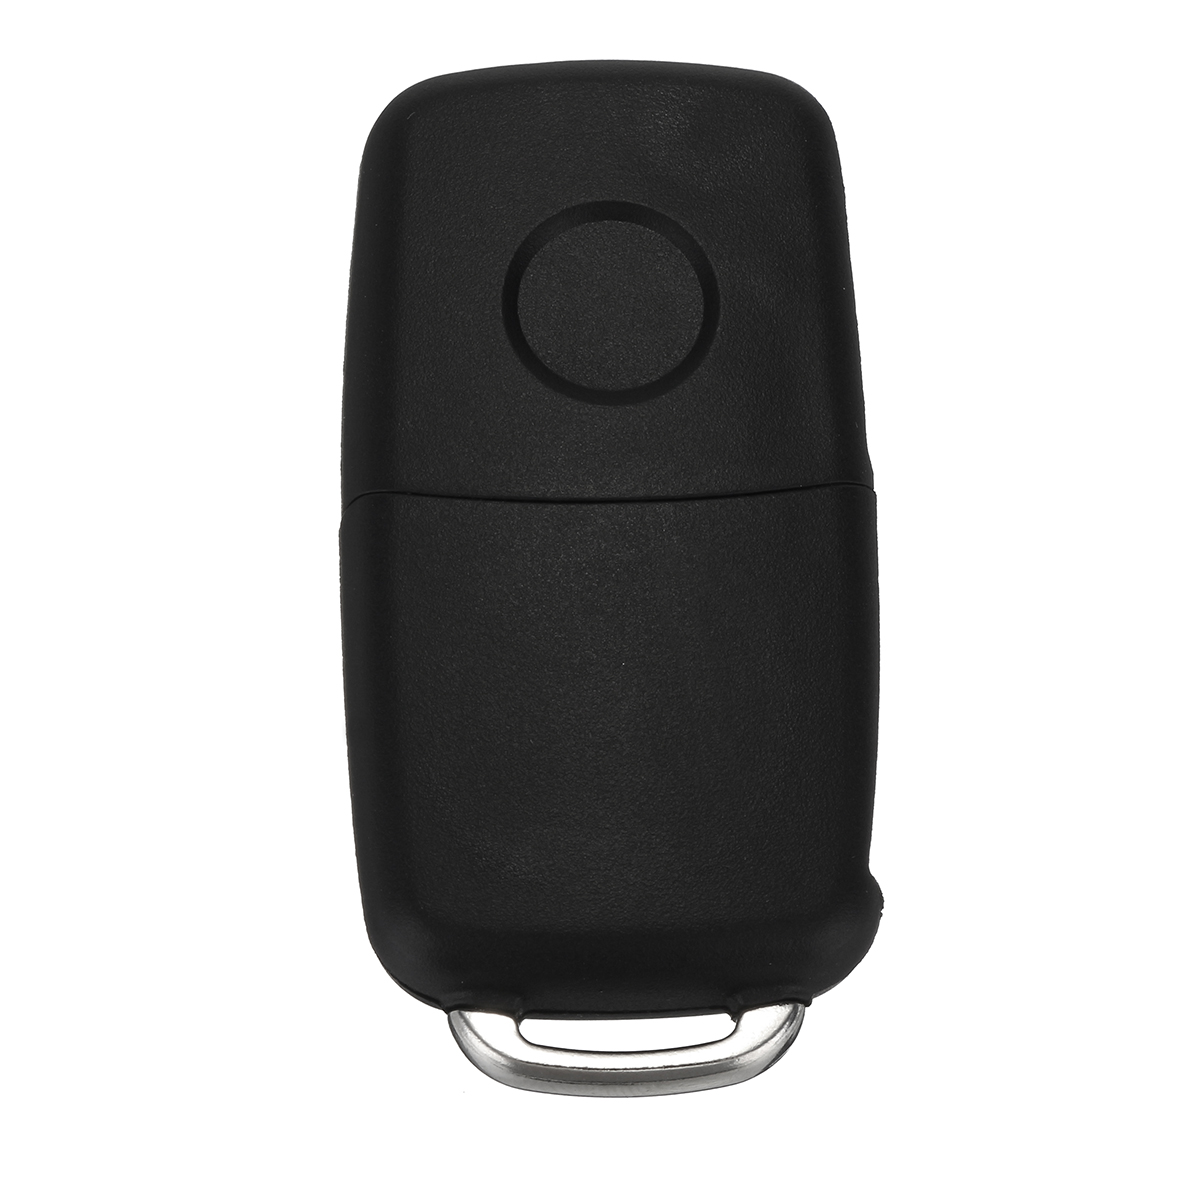 2-Button-Remote-Key-FOB-Case-With-Battery-For-VW-Transporter-T5-Polo-GOLF-Polo-1229230